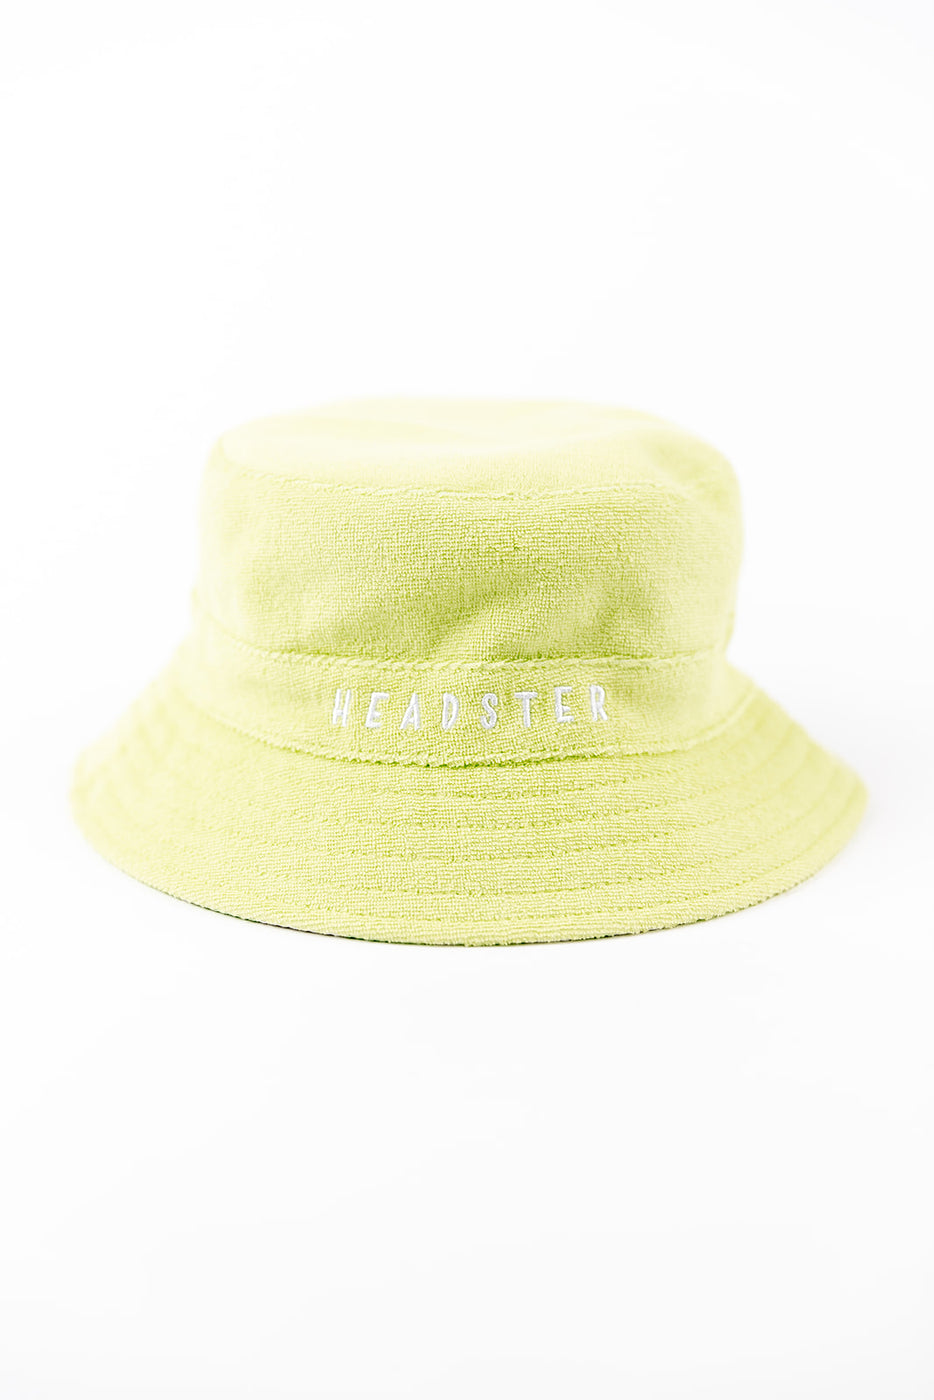 Headster Check Yourself Reversible Bucket Hat